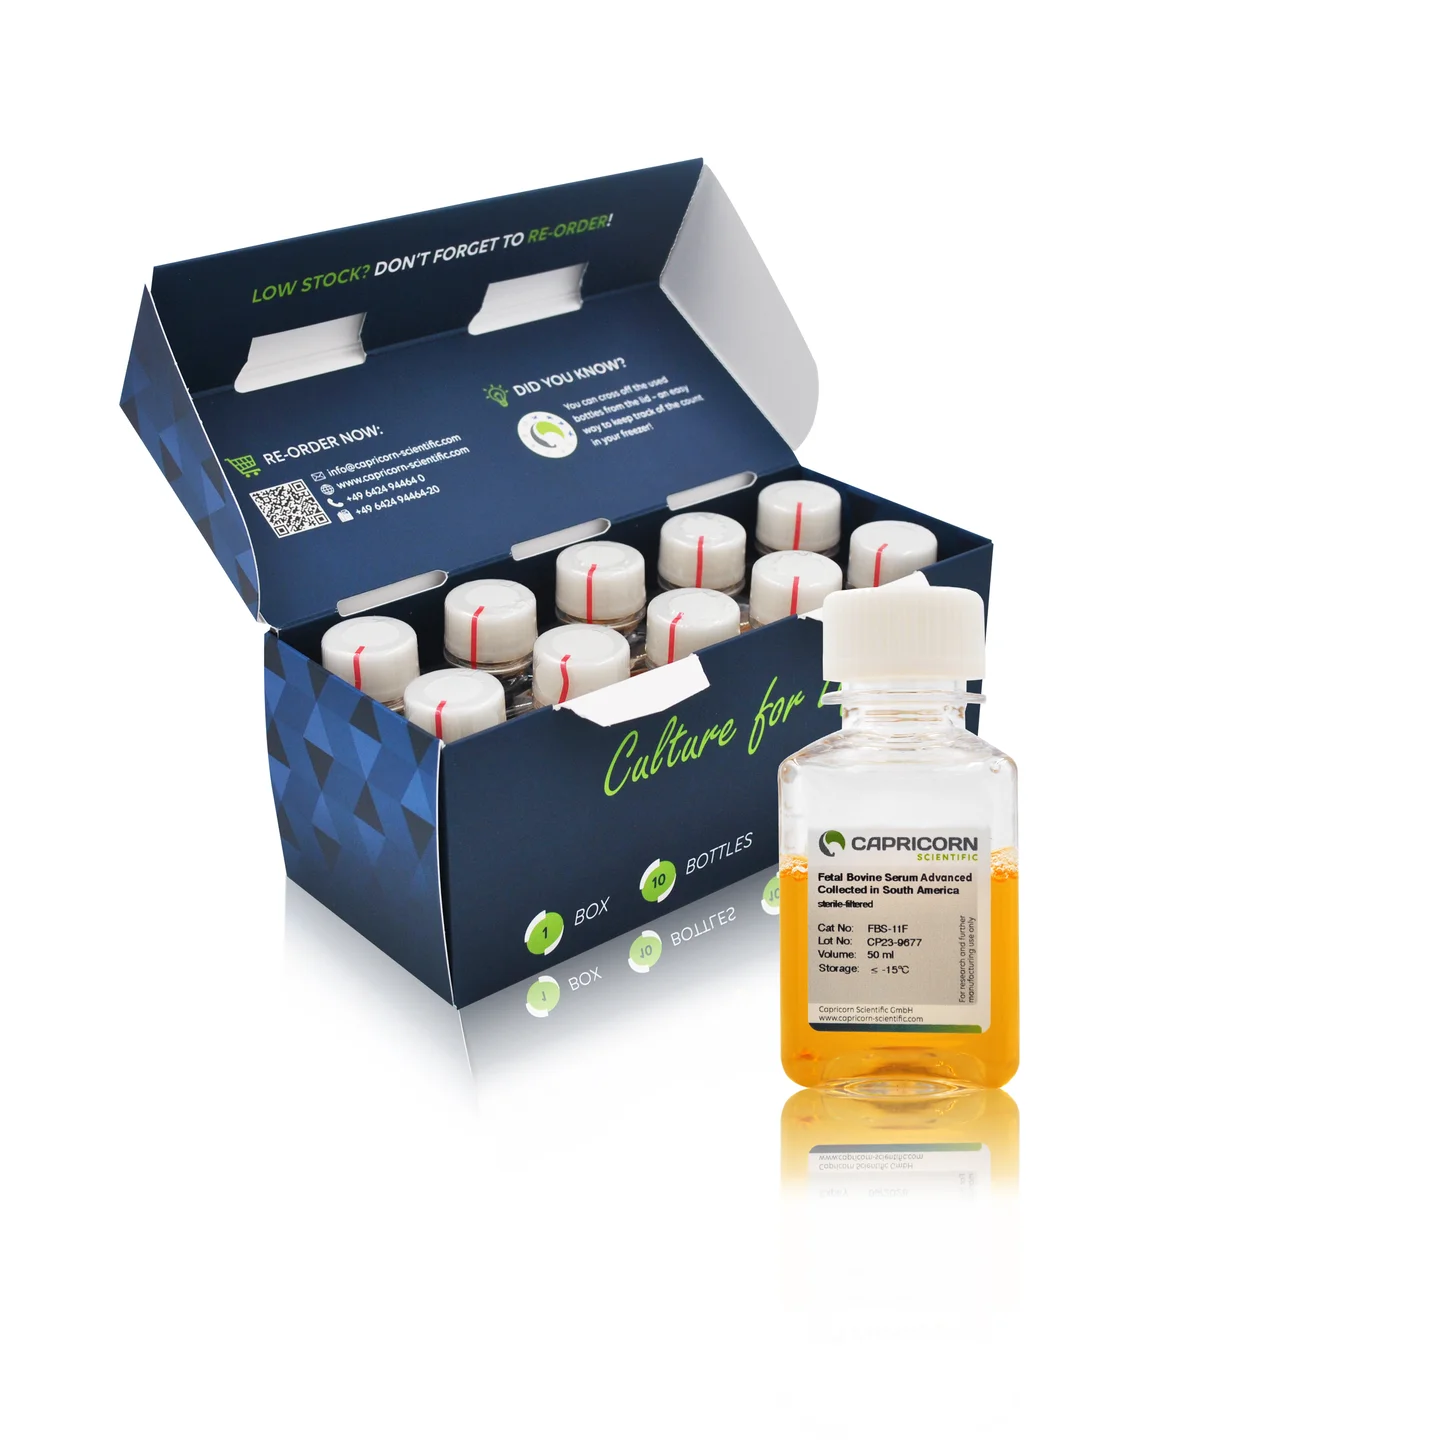 Fetal Bovine Serum Advanced (FBS Minis), Collected in South America